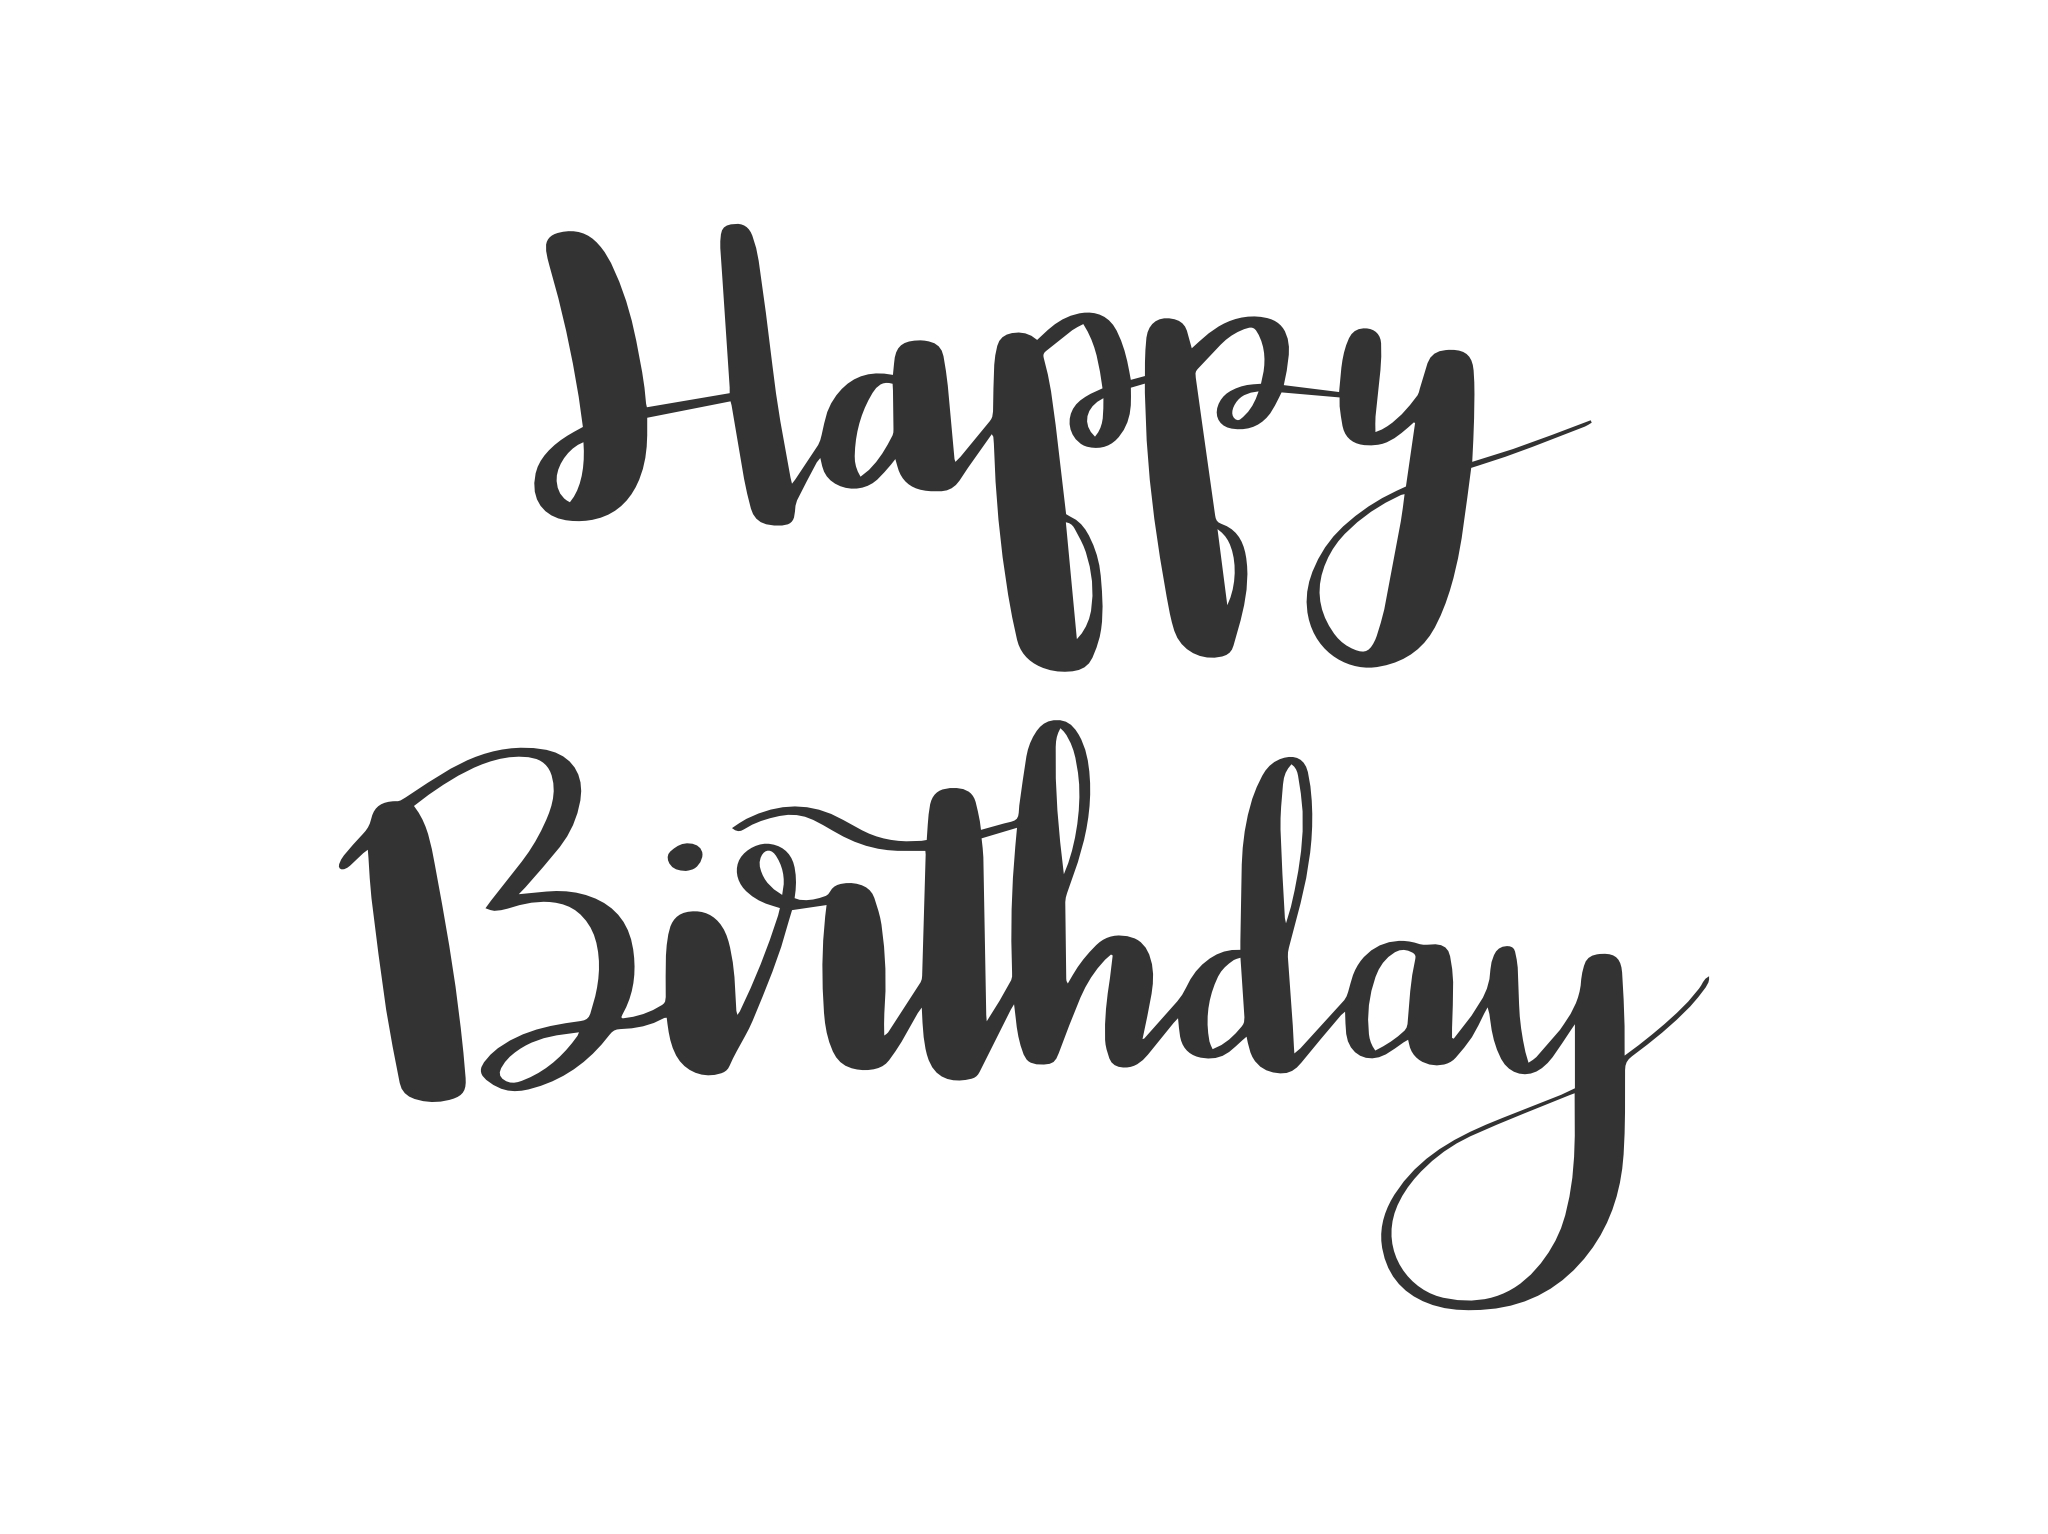 https://www.creativefabrica.com/wp-content/uploads/2020/12/03/SVG-Cut-File-Happy-Birthday-lettering-Graphics-7003748-1.jpg